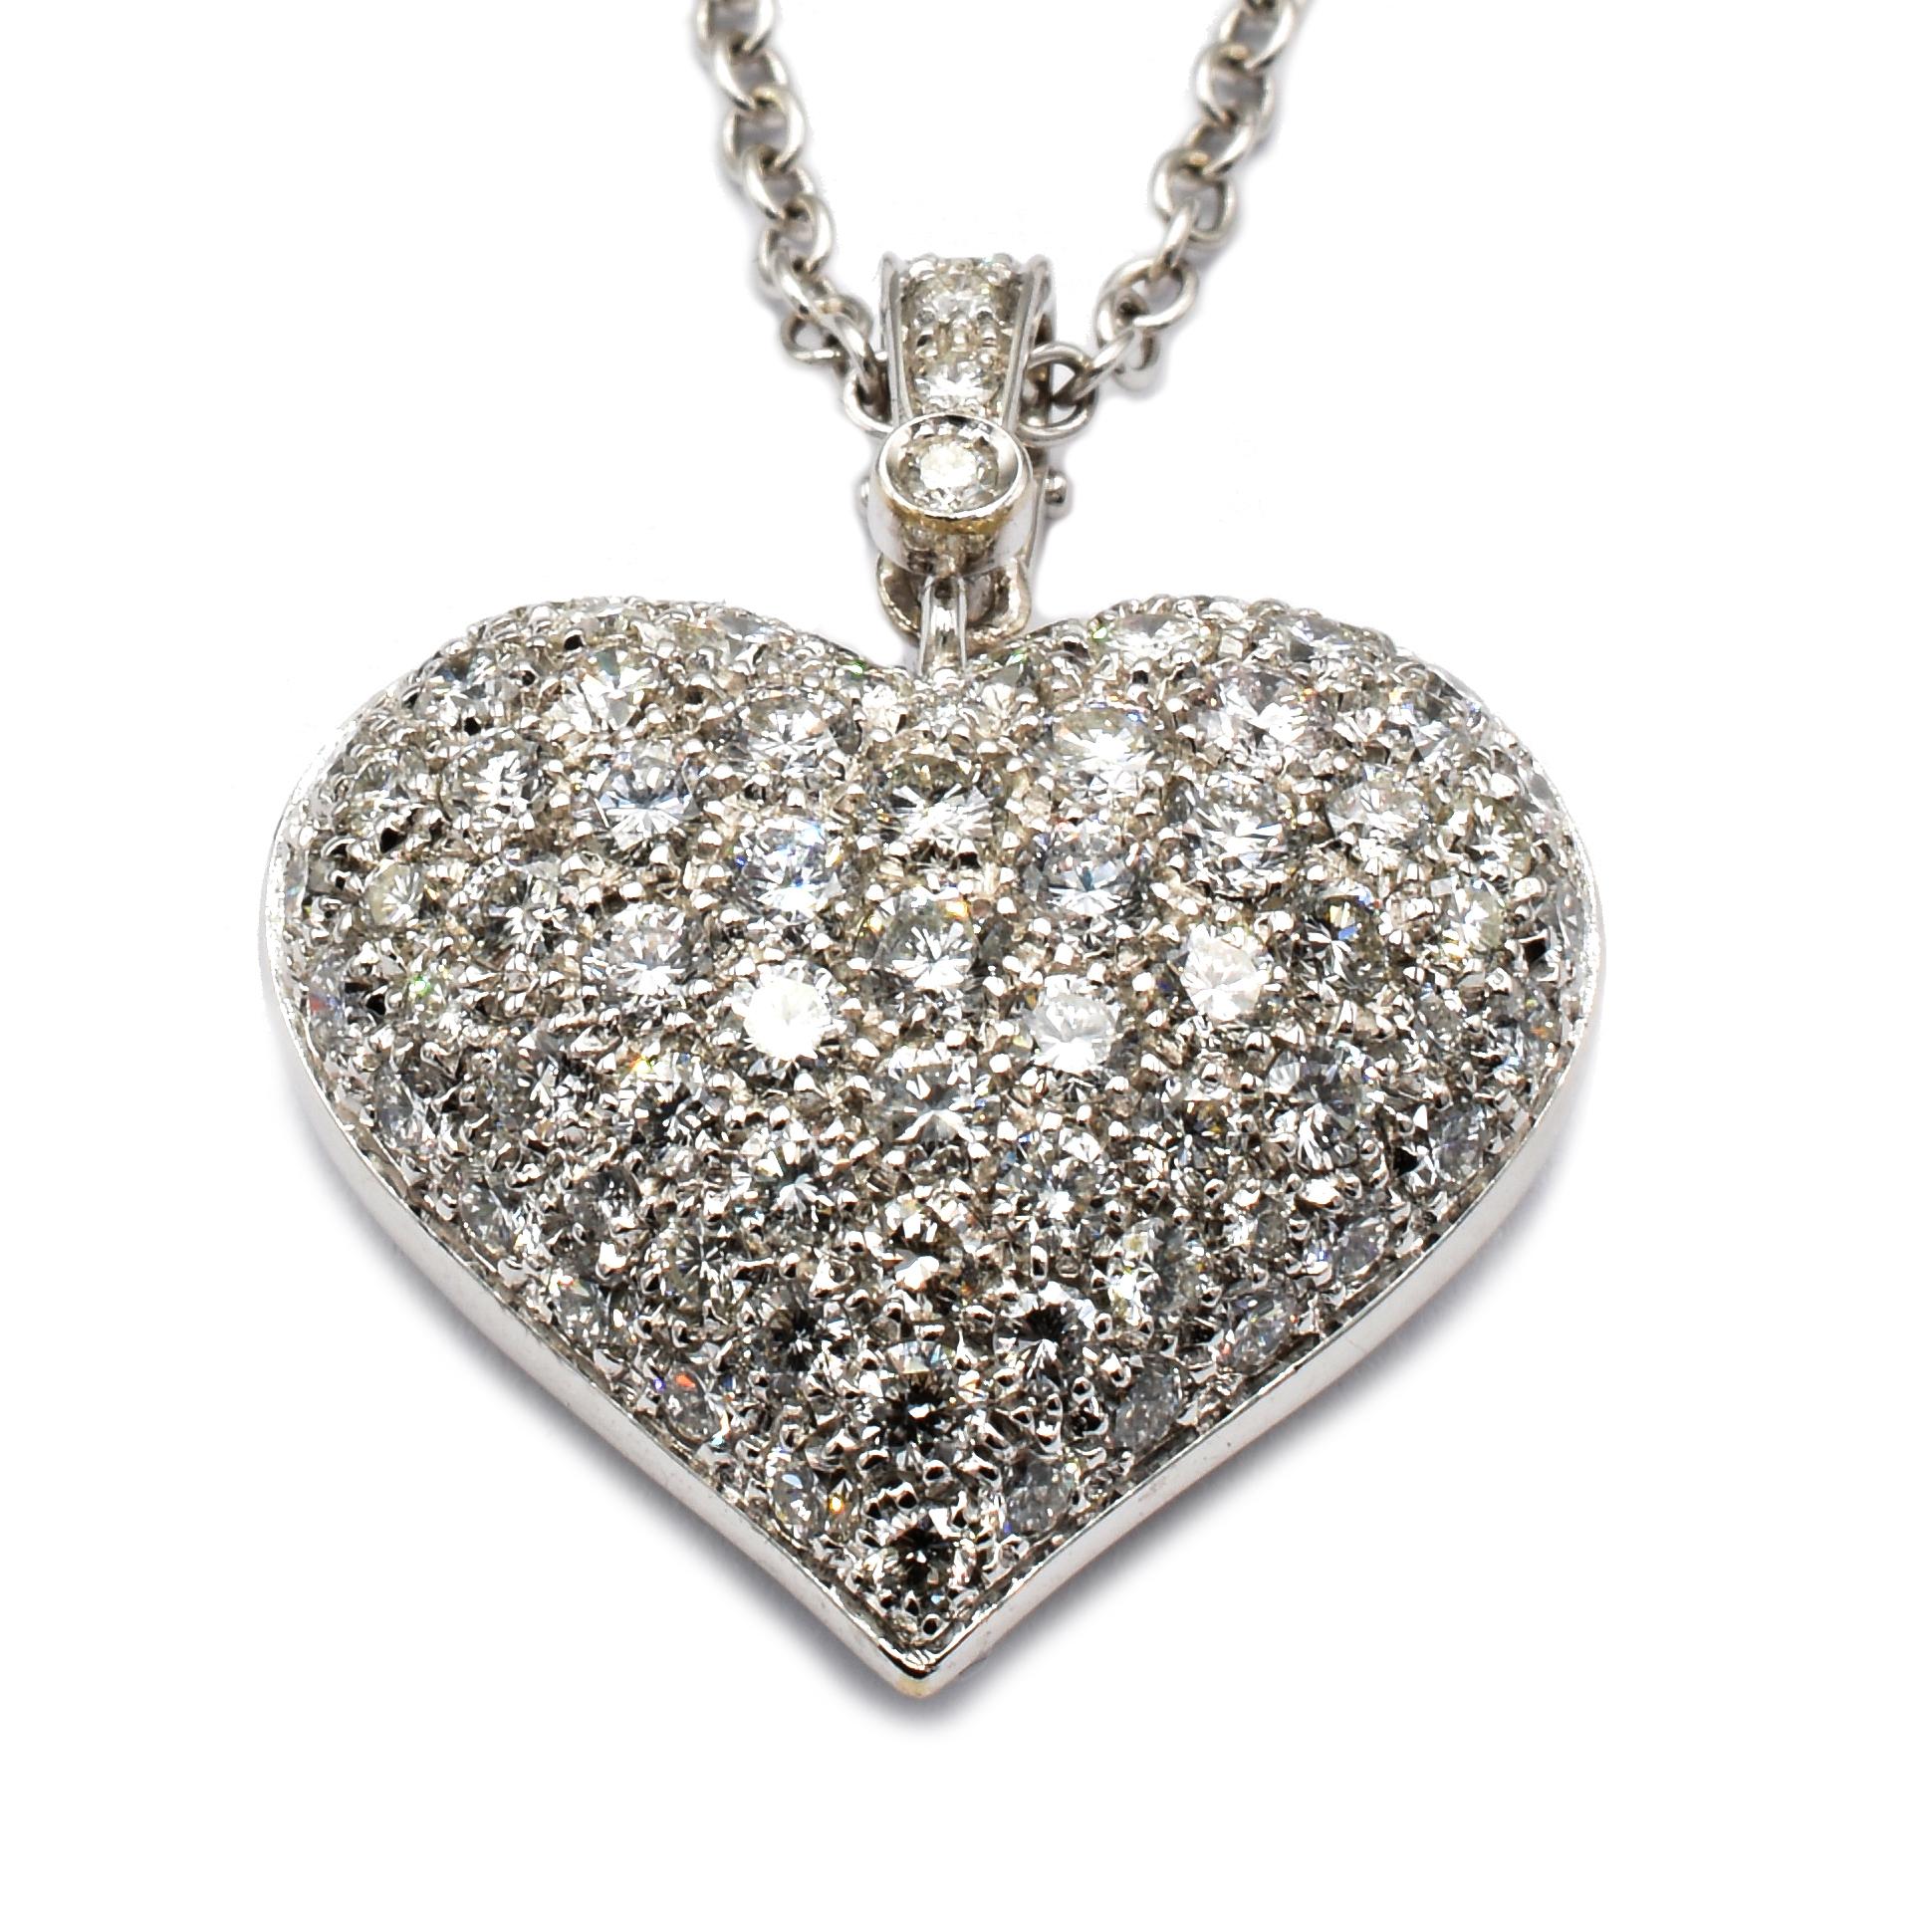 White Gold Heart Pendant Necklace with White Diamonds.
Handmade in Italy in Our Atelier in Valenza (AL).
18Kt Gold g 10.05
G Color Vs Clarity White Diamonds ct 2.43
Beautiful Heart Inlays on the back. The Pendant Clasp can be opened to fit any